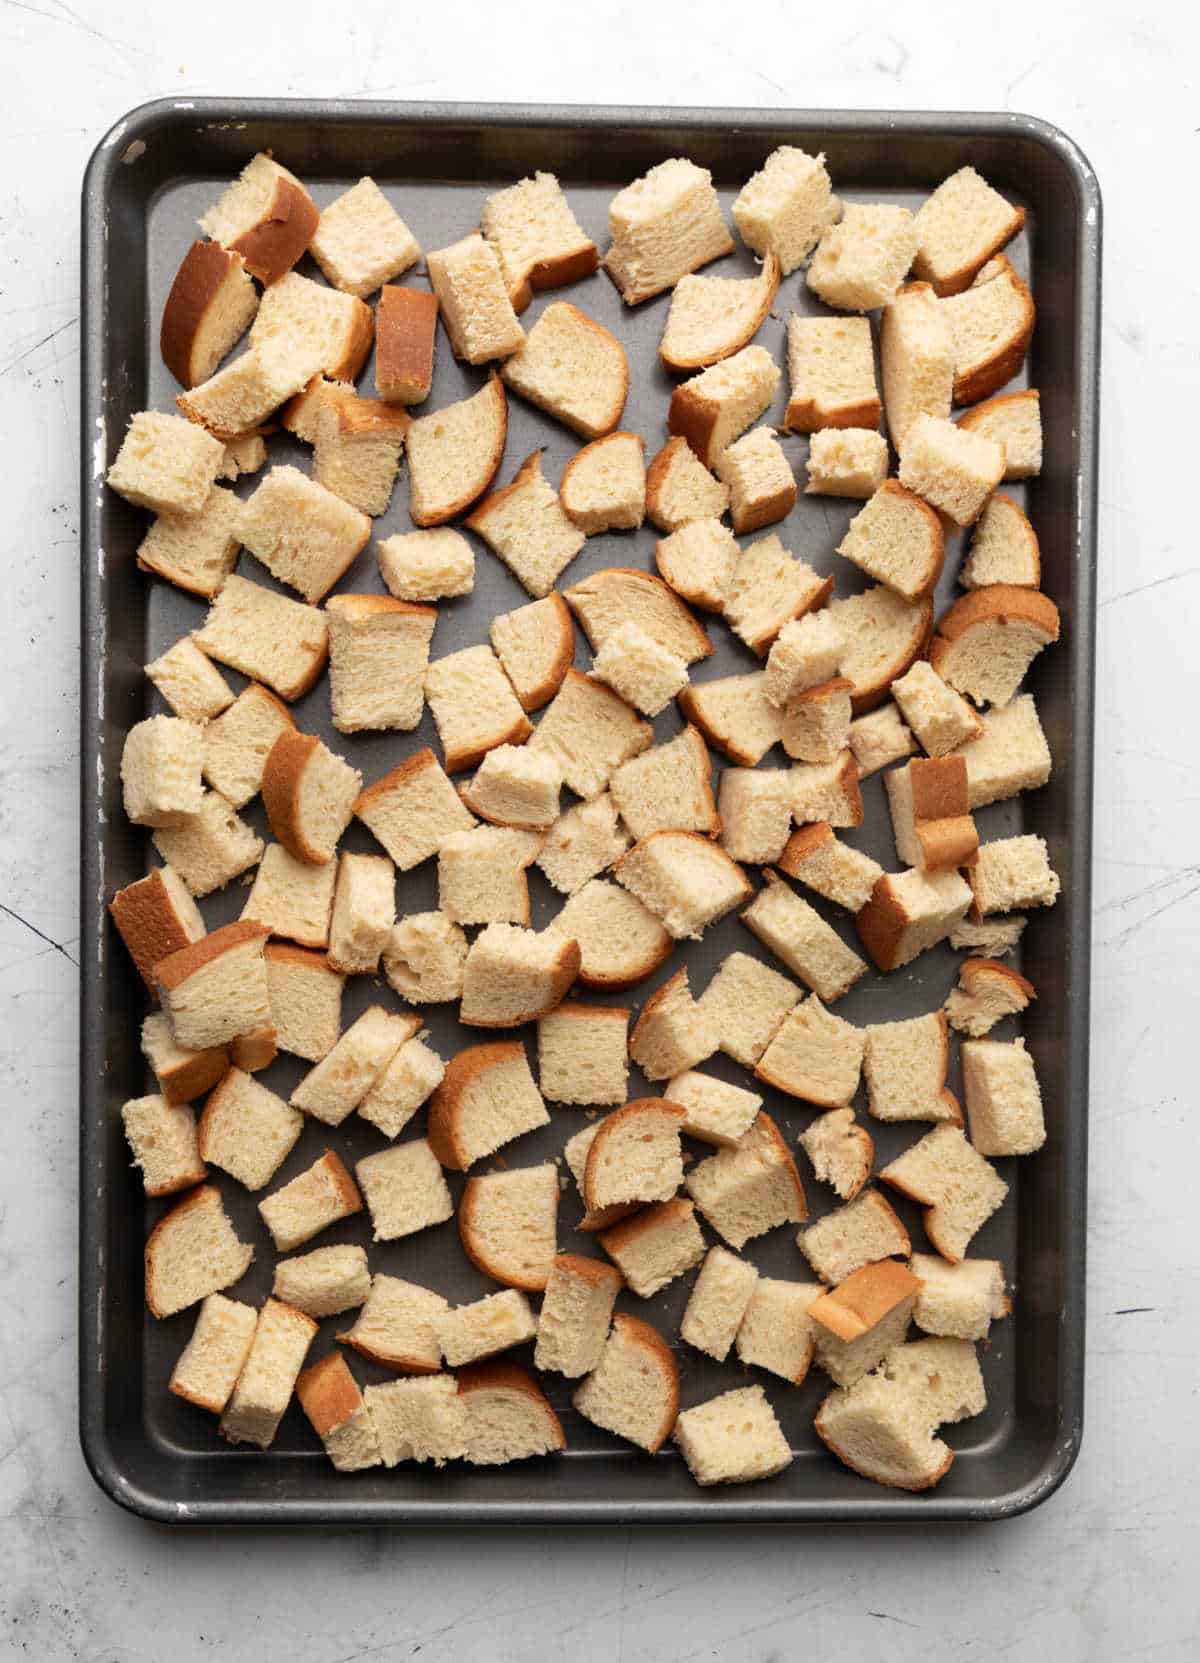 Toasted bread cubes on a rimmed baking pan.